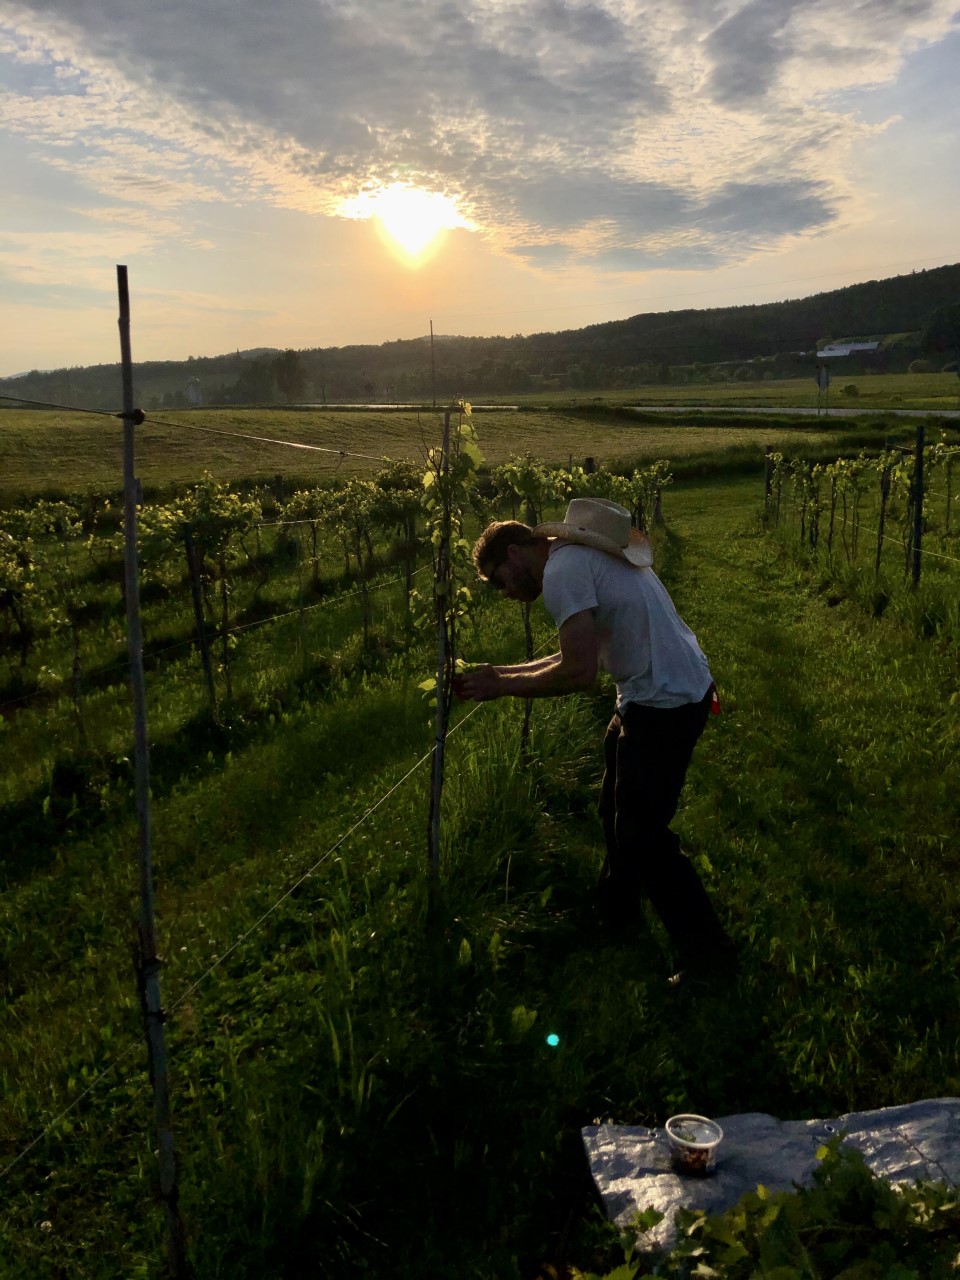 David Keck, dressed casually, tending vines in a vineyard, the sun in the sky casting an inspiring and multifaceted light